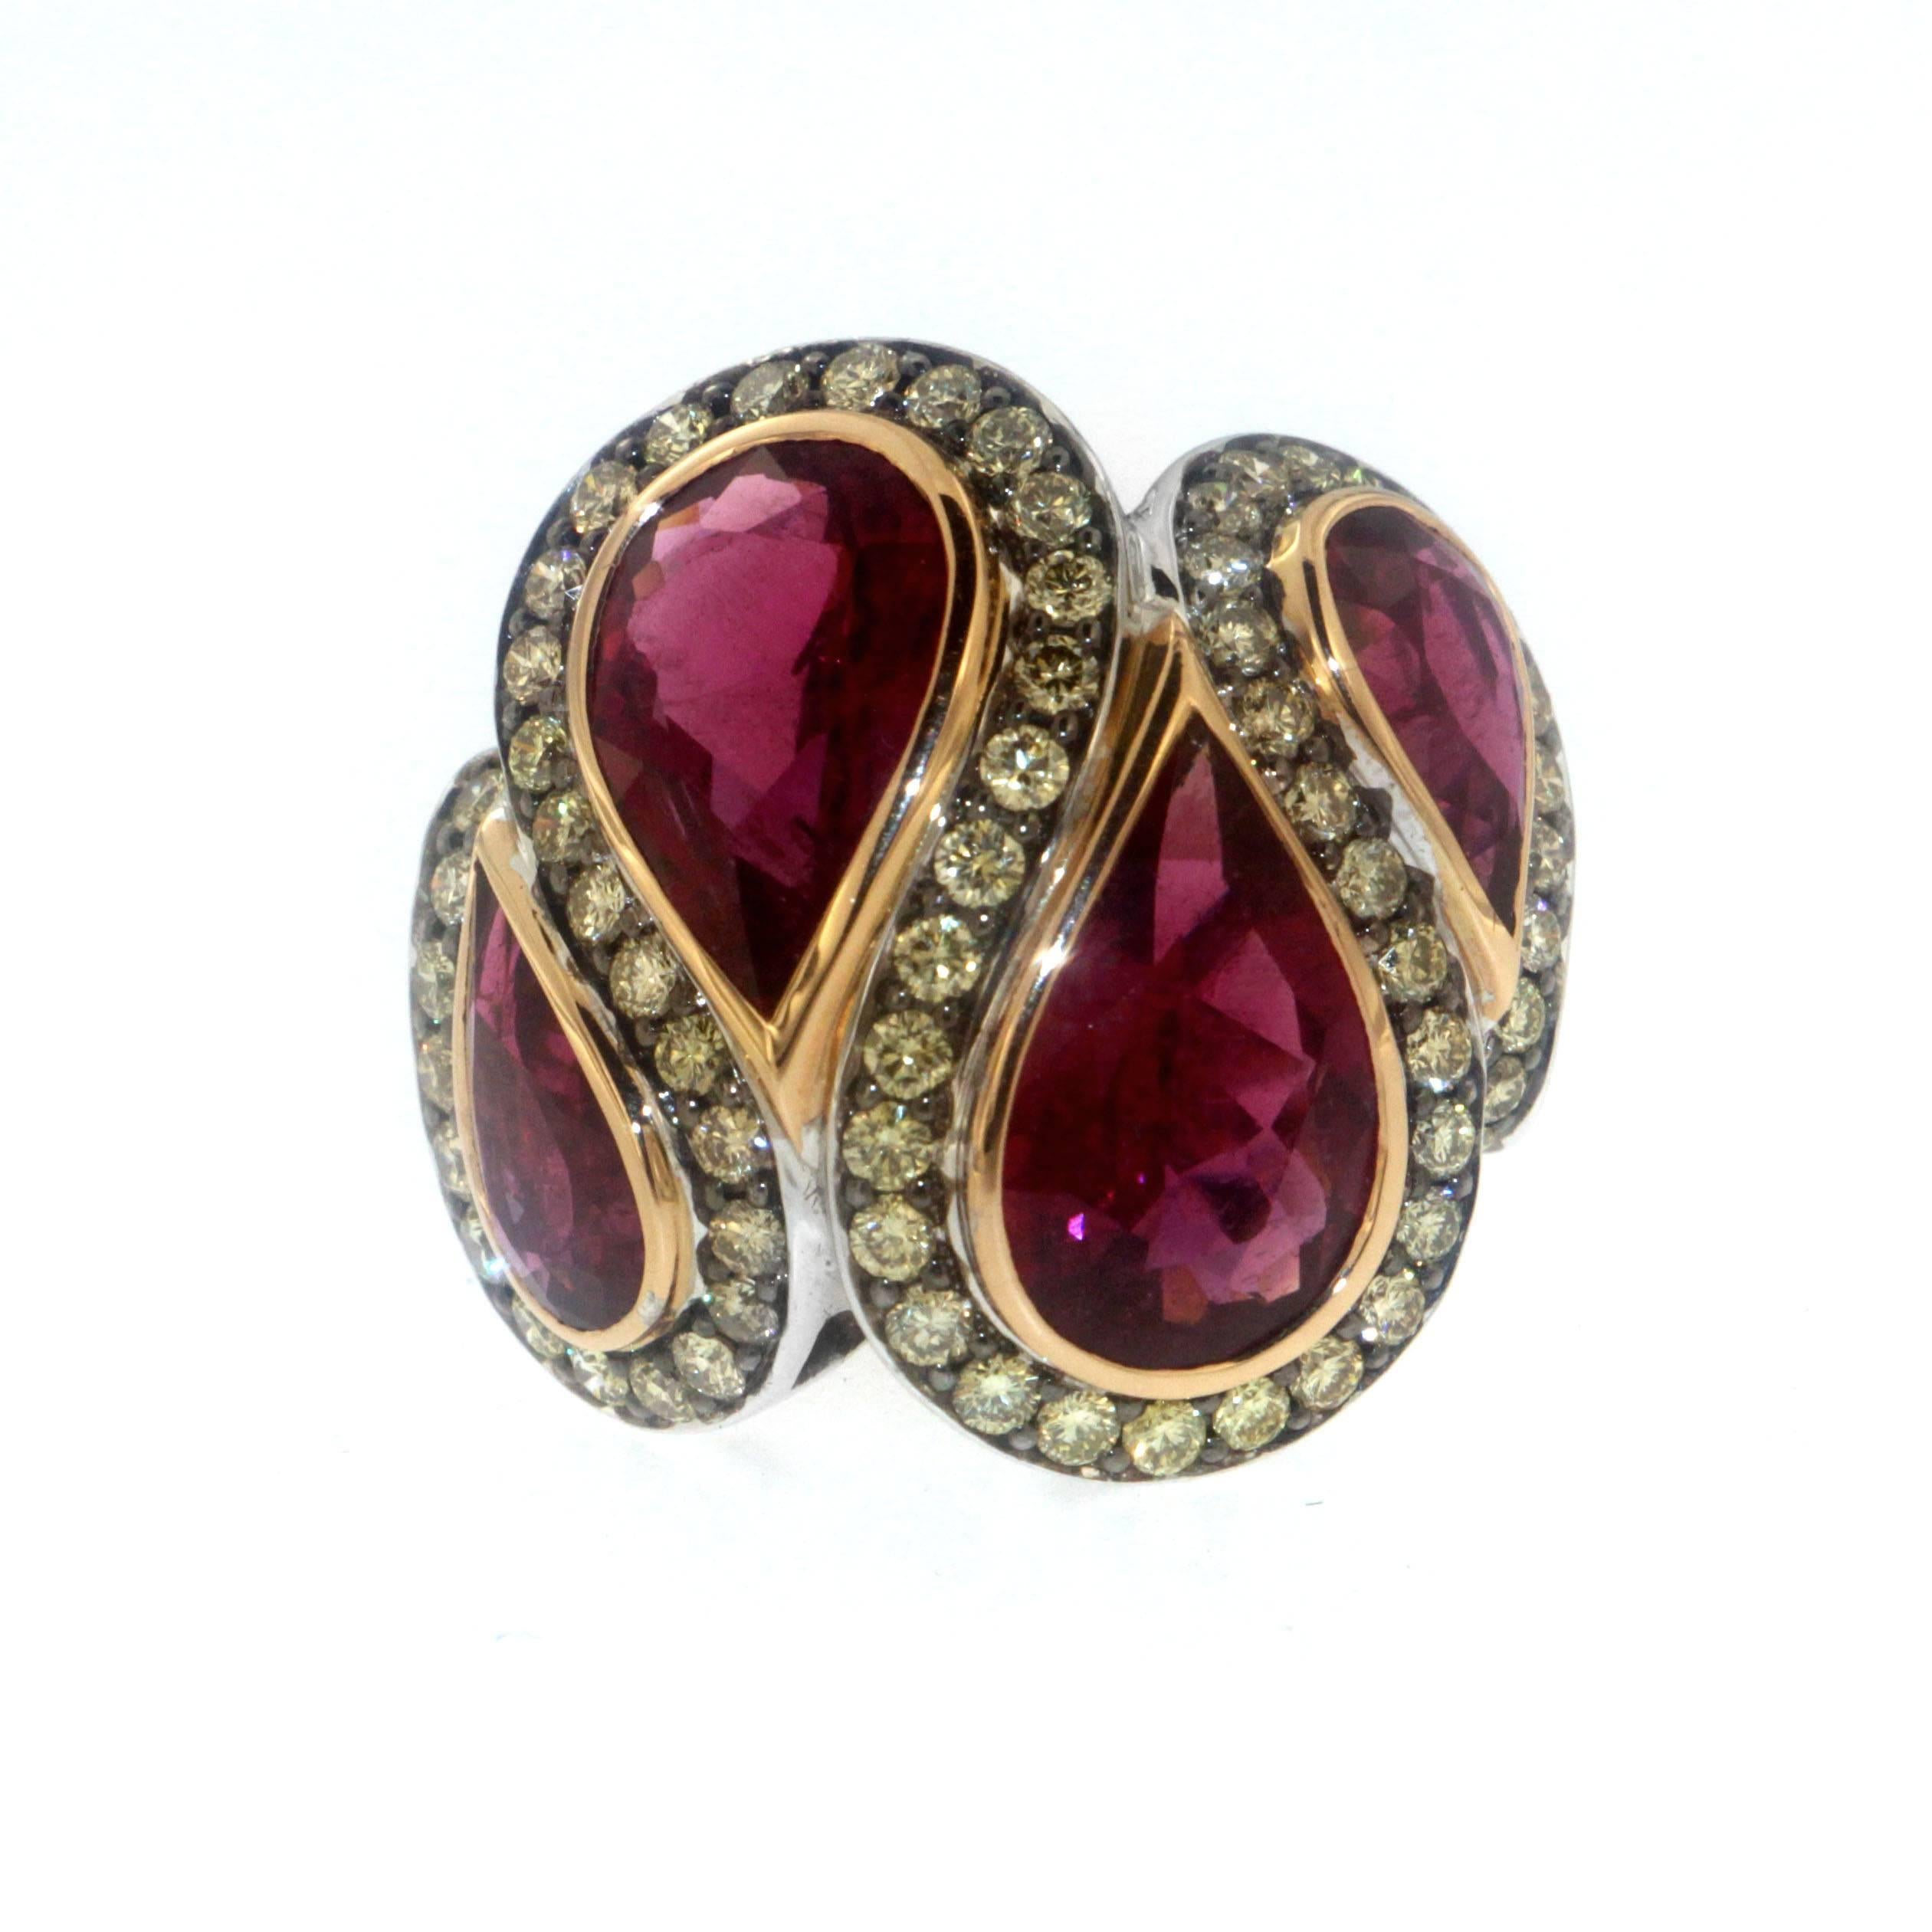 The enchanting four Ruby (9.49 Carats) teardrops flowing in a swirling motion around 1.86 Carats of Yellow Diamonds is a visual masterstroke of creativity and workmanship, accomplished by only Zorab.

This item has a serial number and bears the